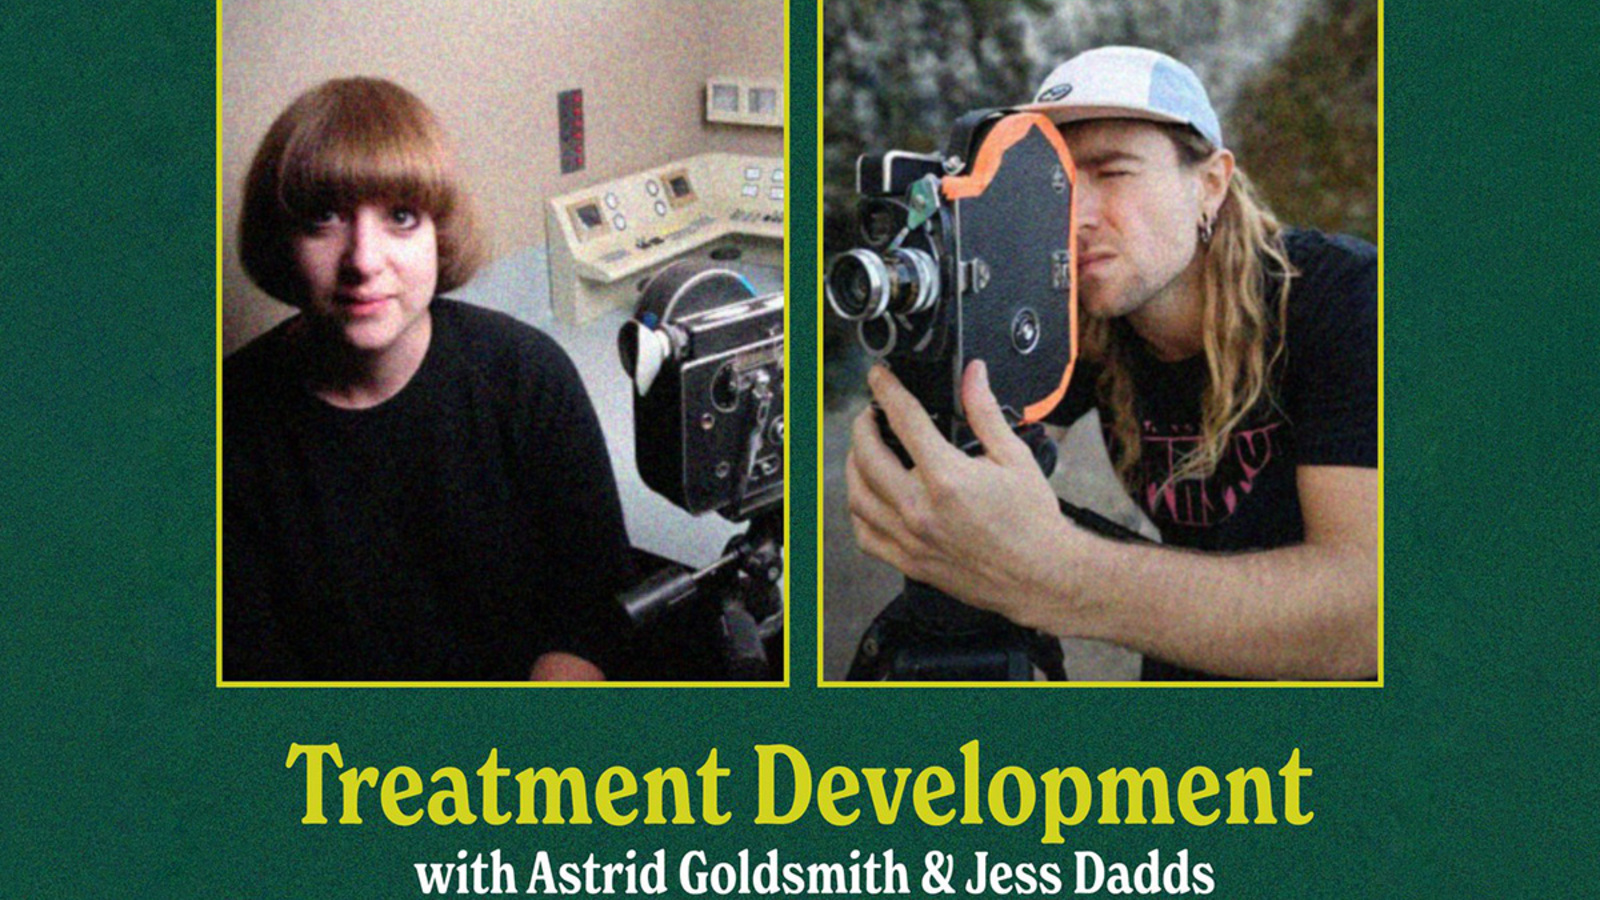 Graphic shows headshots of Astrid Goldsmith and Jess Dadds with the text: Treatment Development with Astrid Goldsmith and Jess Dadds